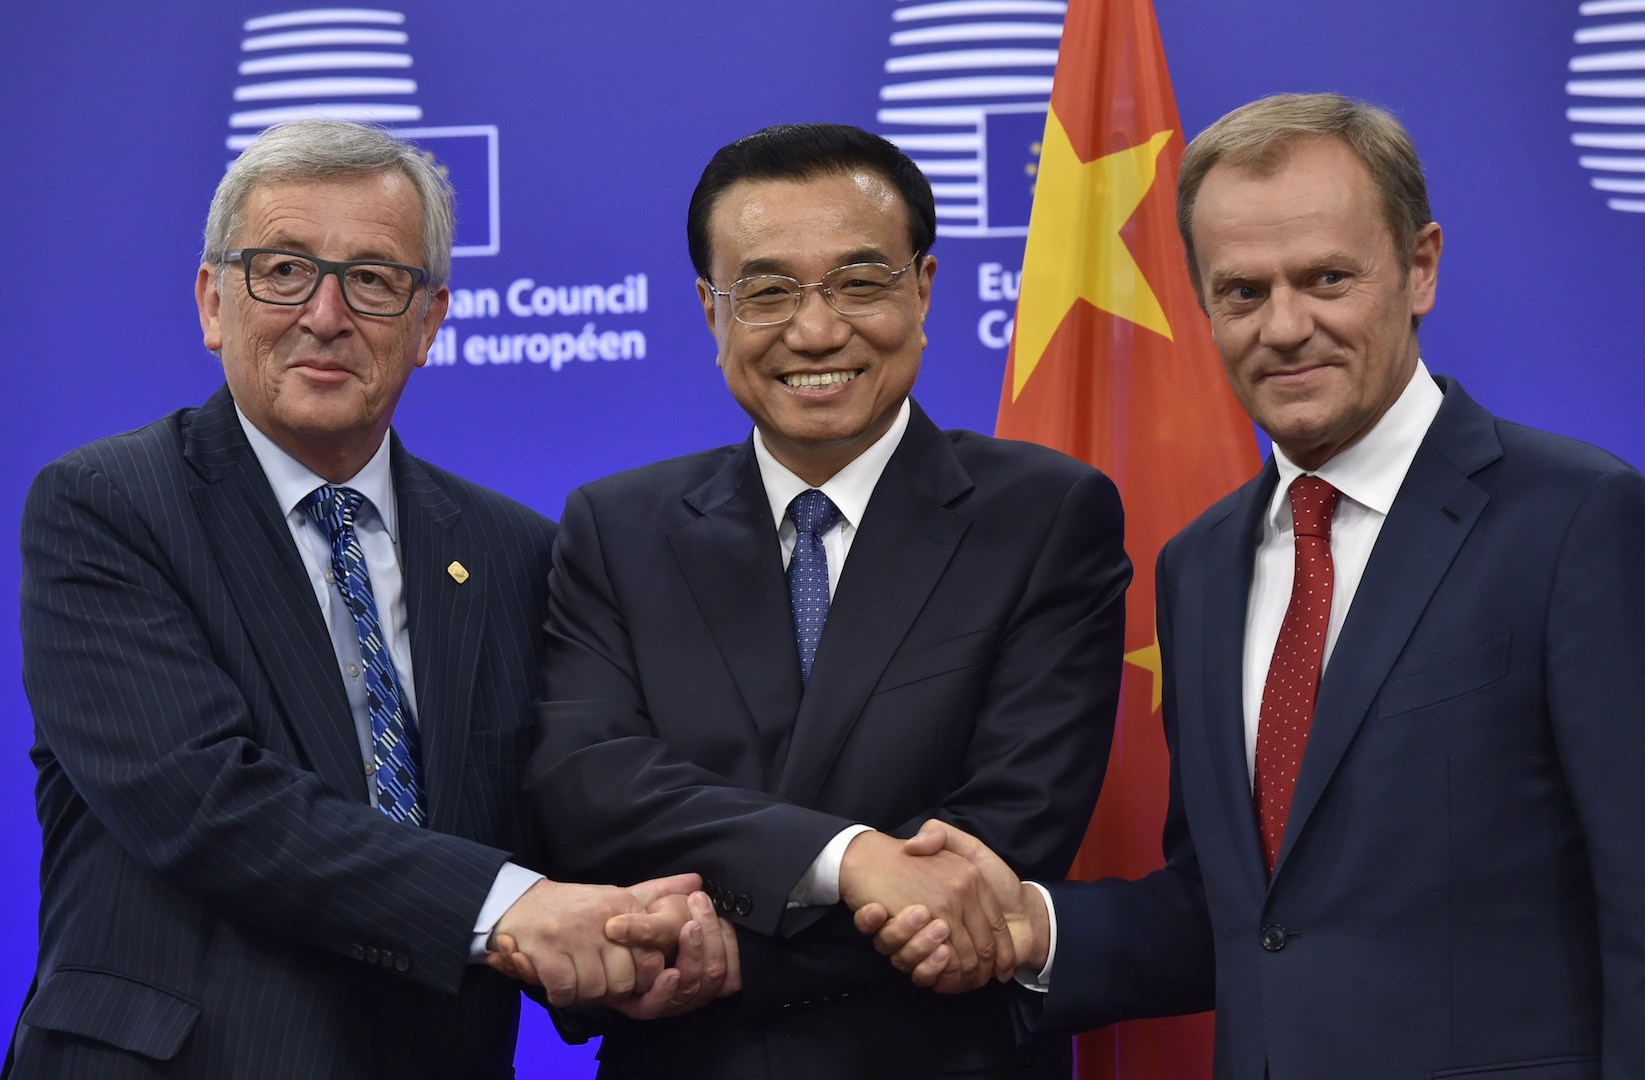 [Press Release] Human Rights Must Factor into Dialogue During Li Keqiang Visit to Berlin & Brussels